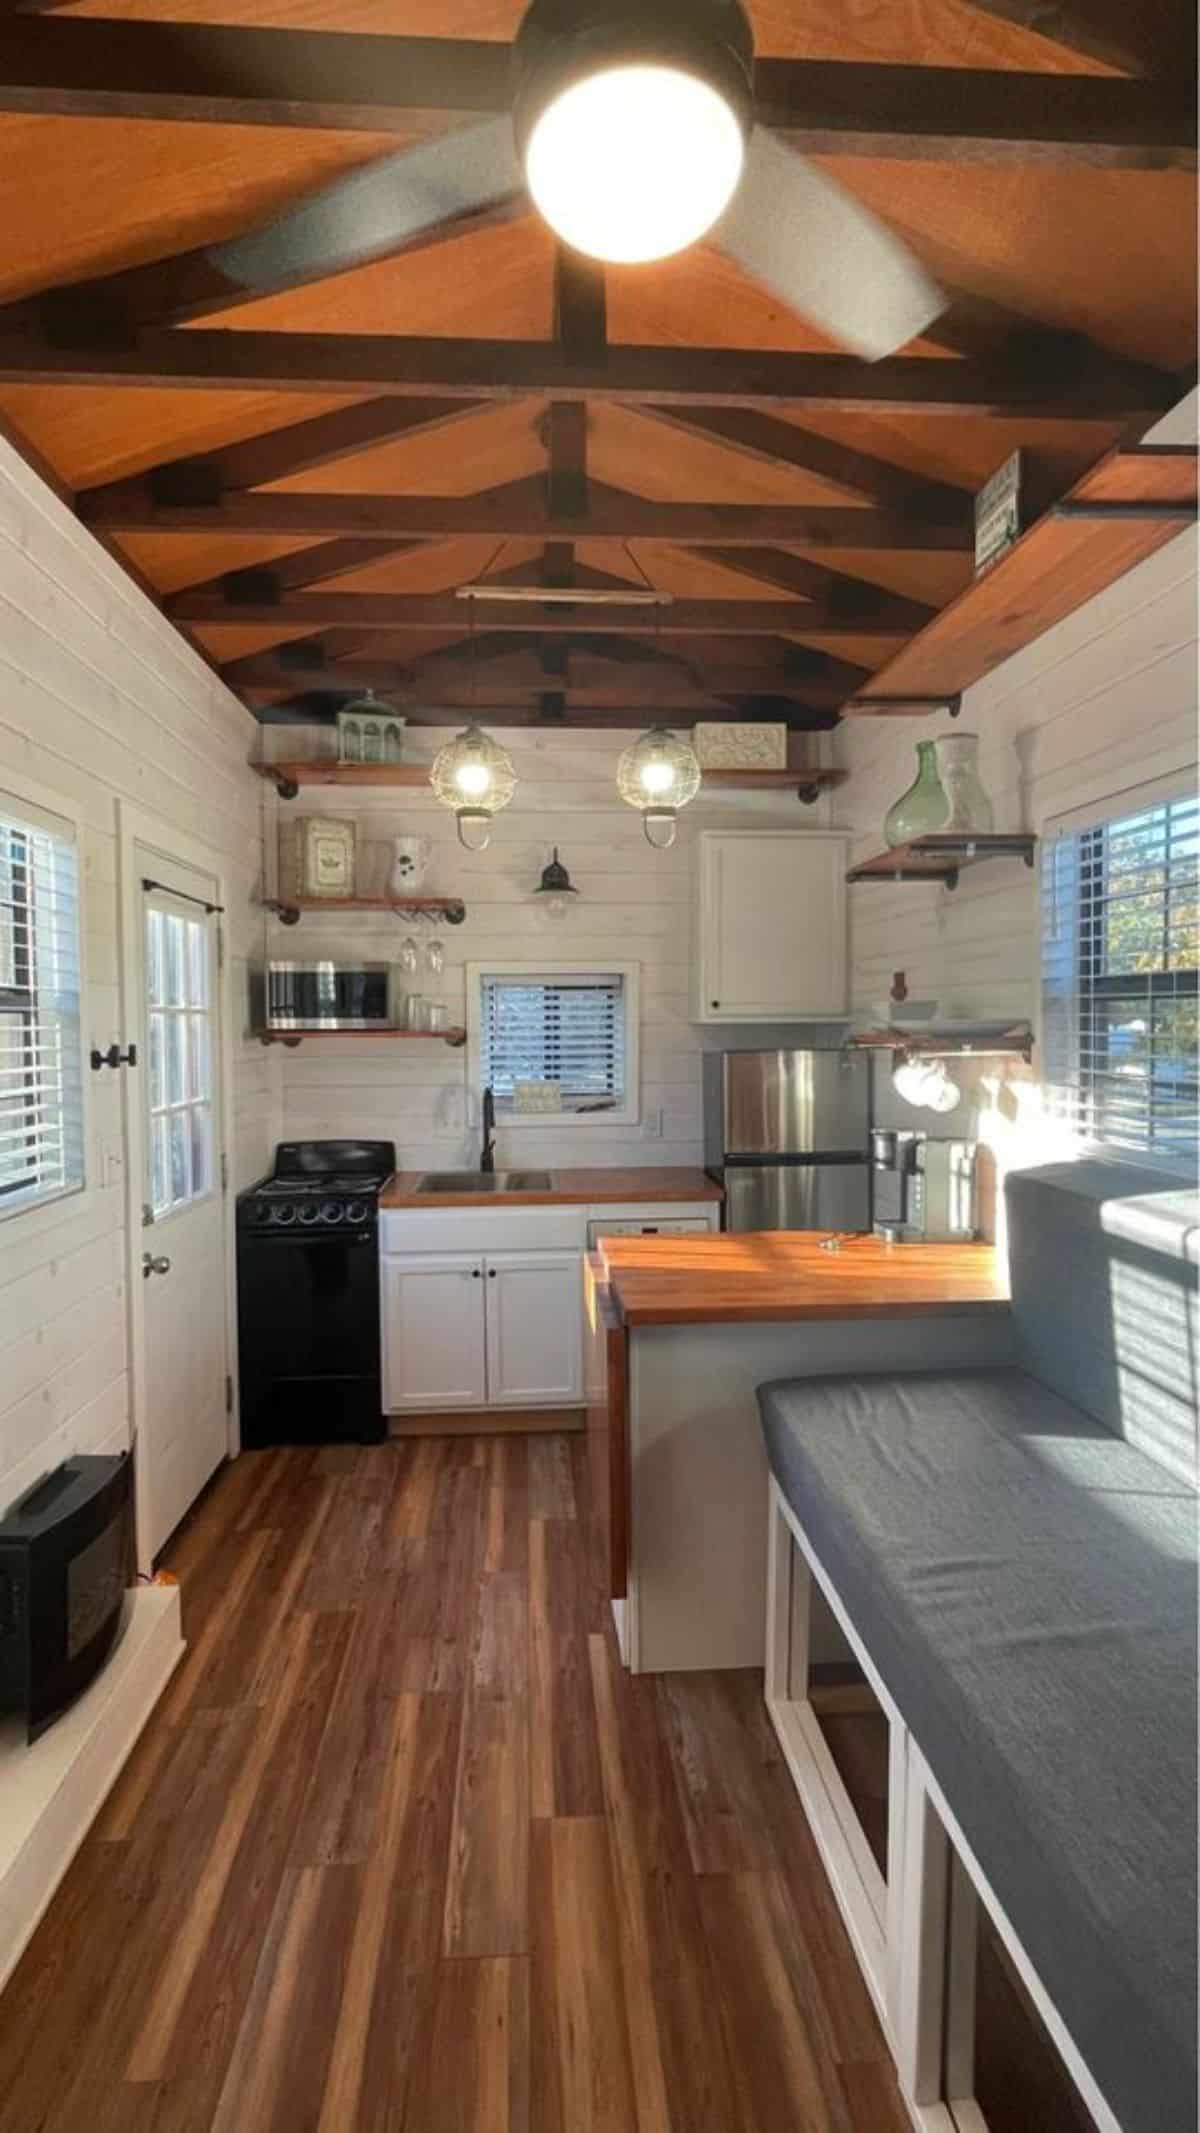 U shaped kitchen area of tiny home for four